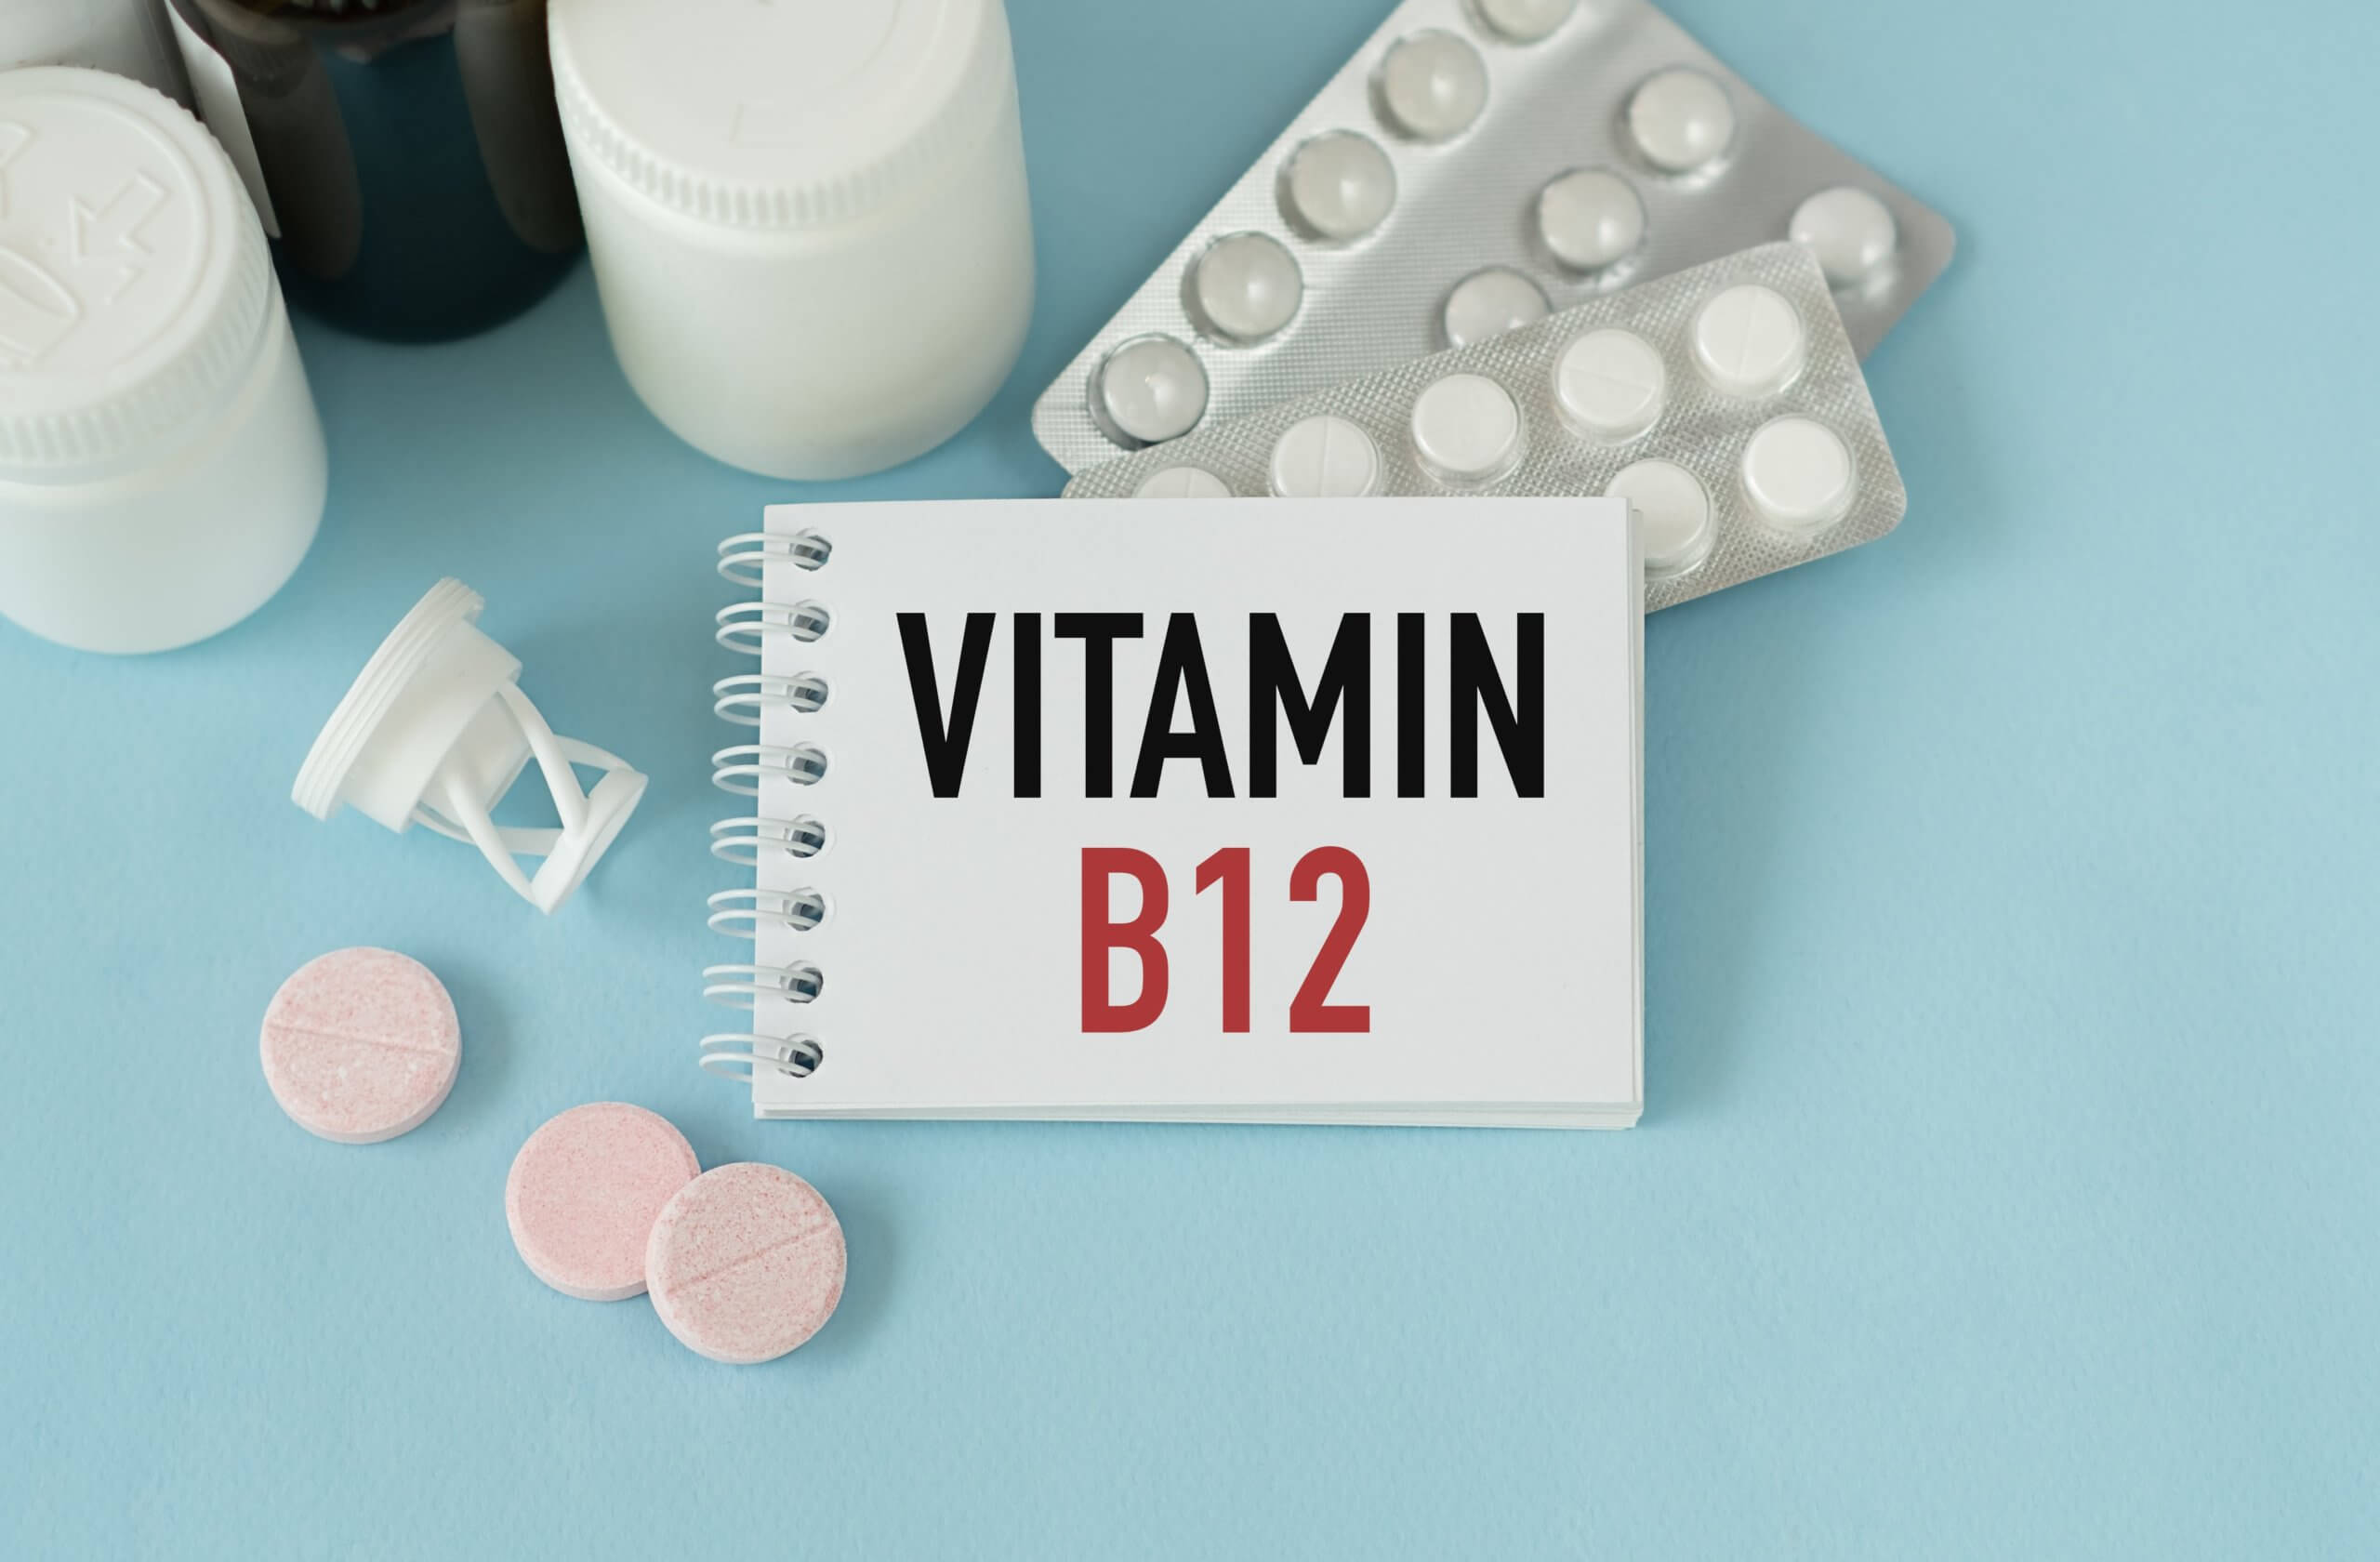 Does vitamin B12 give you more energy